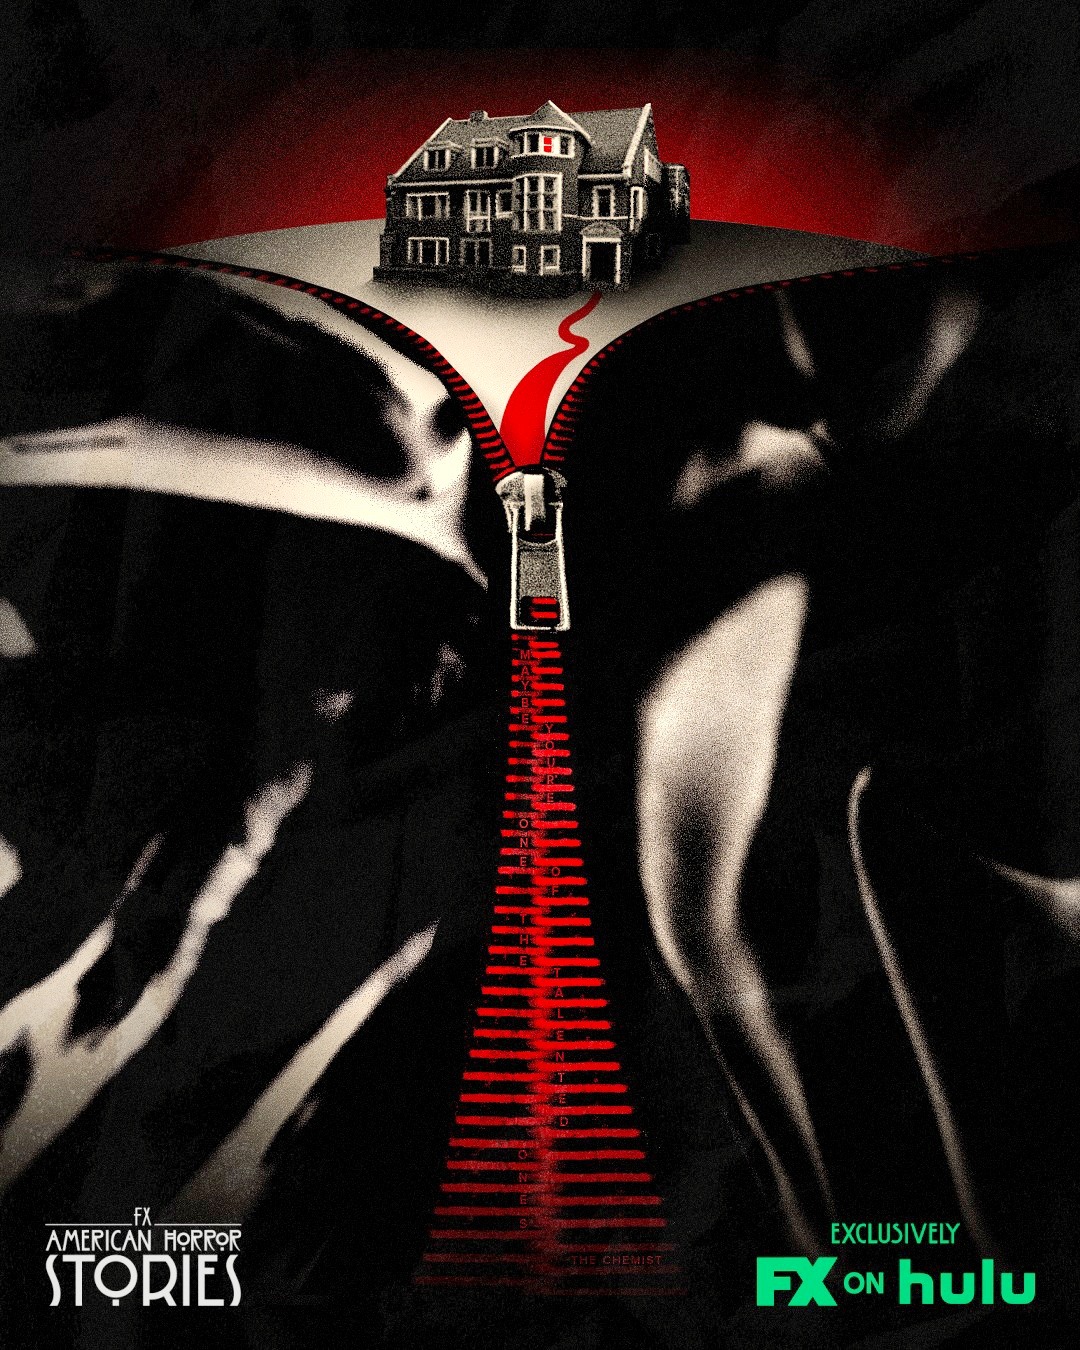 Extra Large TV Poster Image for American Horror Stories (#5 of 24)